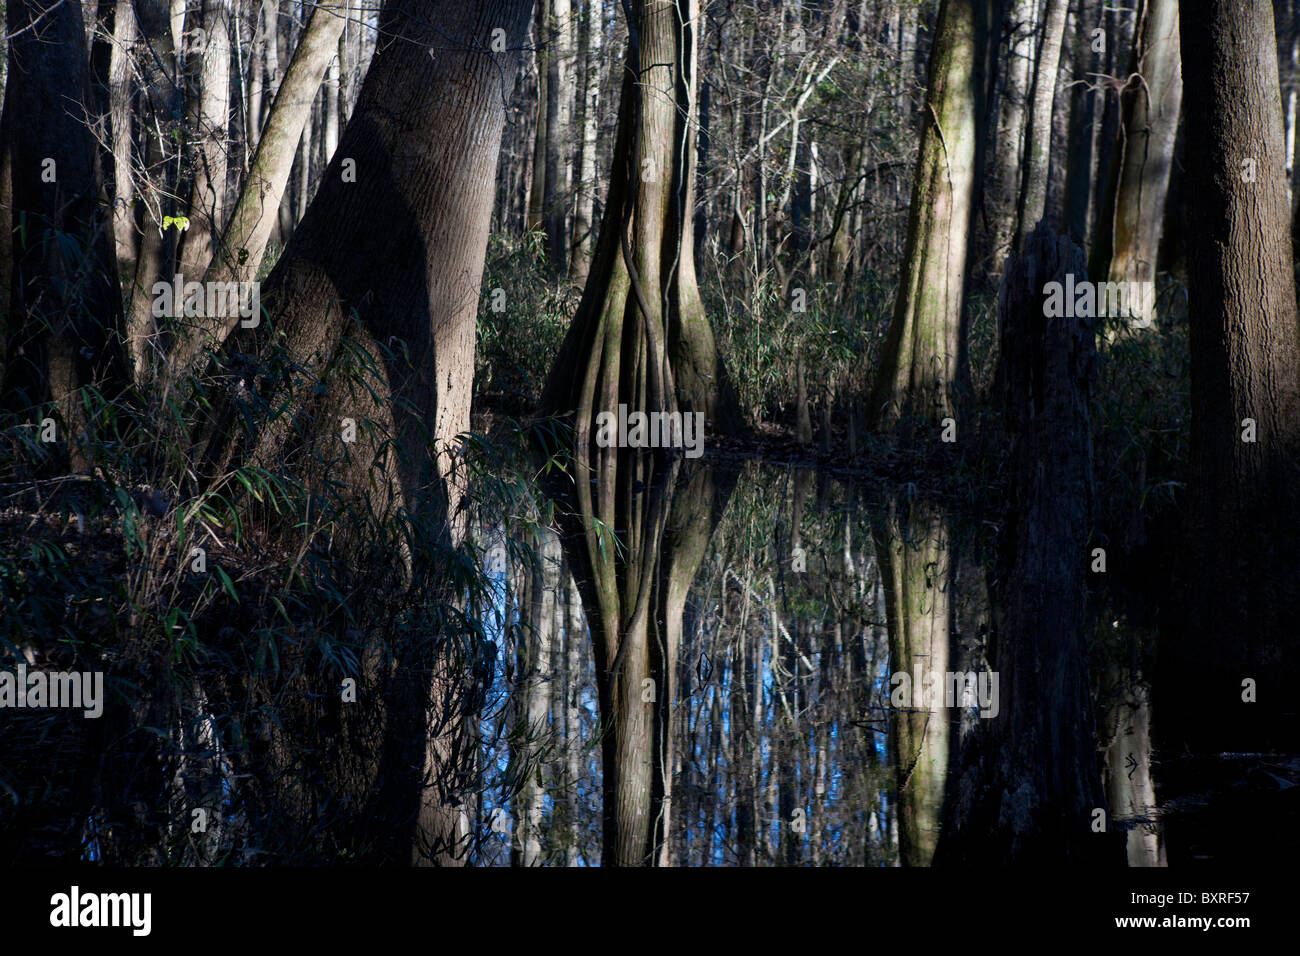 Reflection of forest onto flooded swamp forest floor, Congaree National Park, South Carolina, United States of America Stock Photo